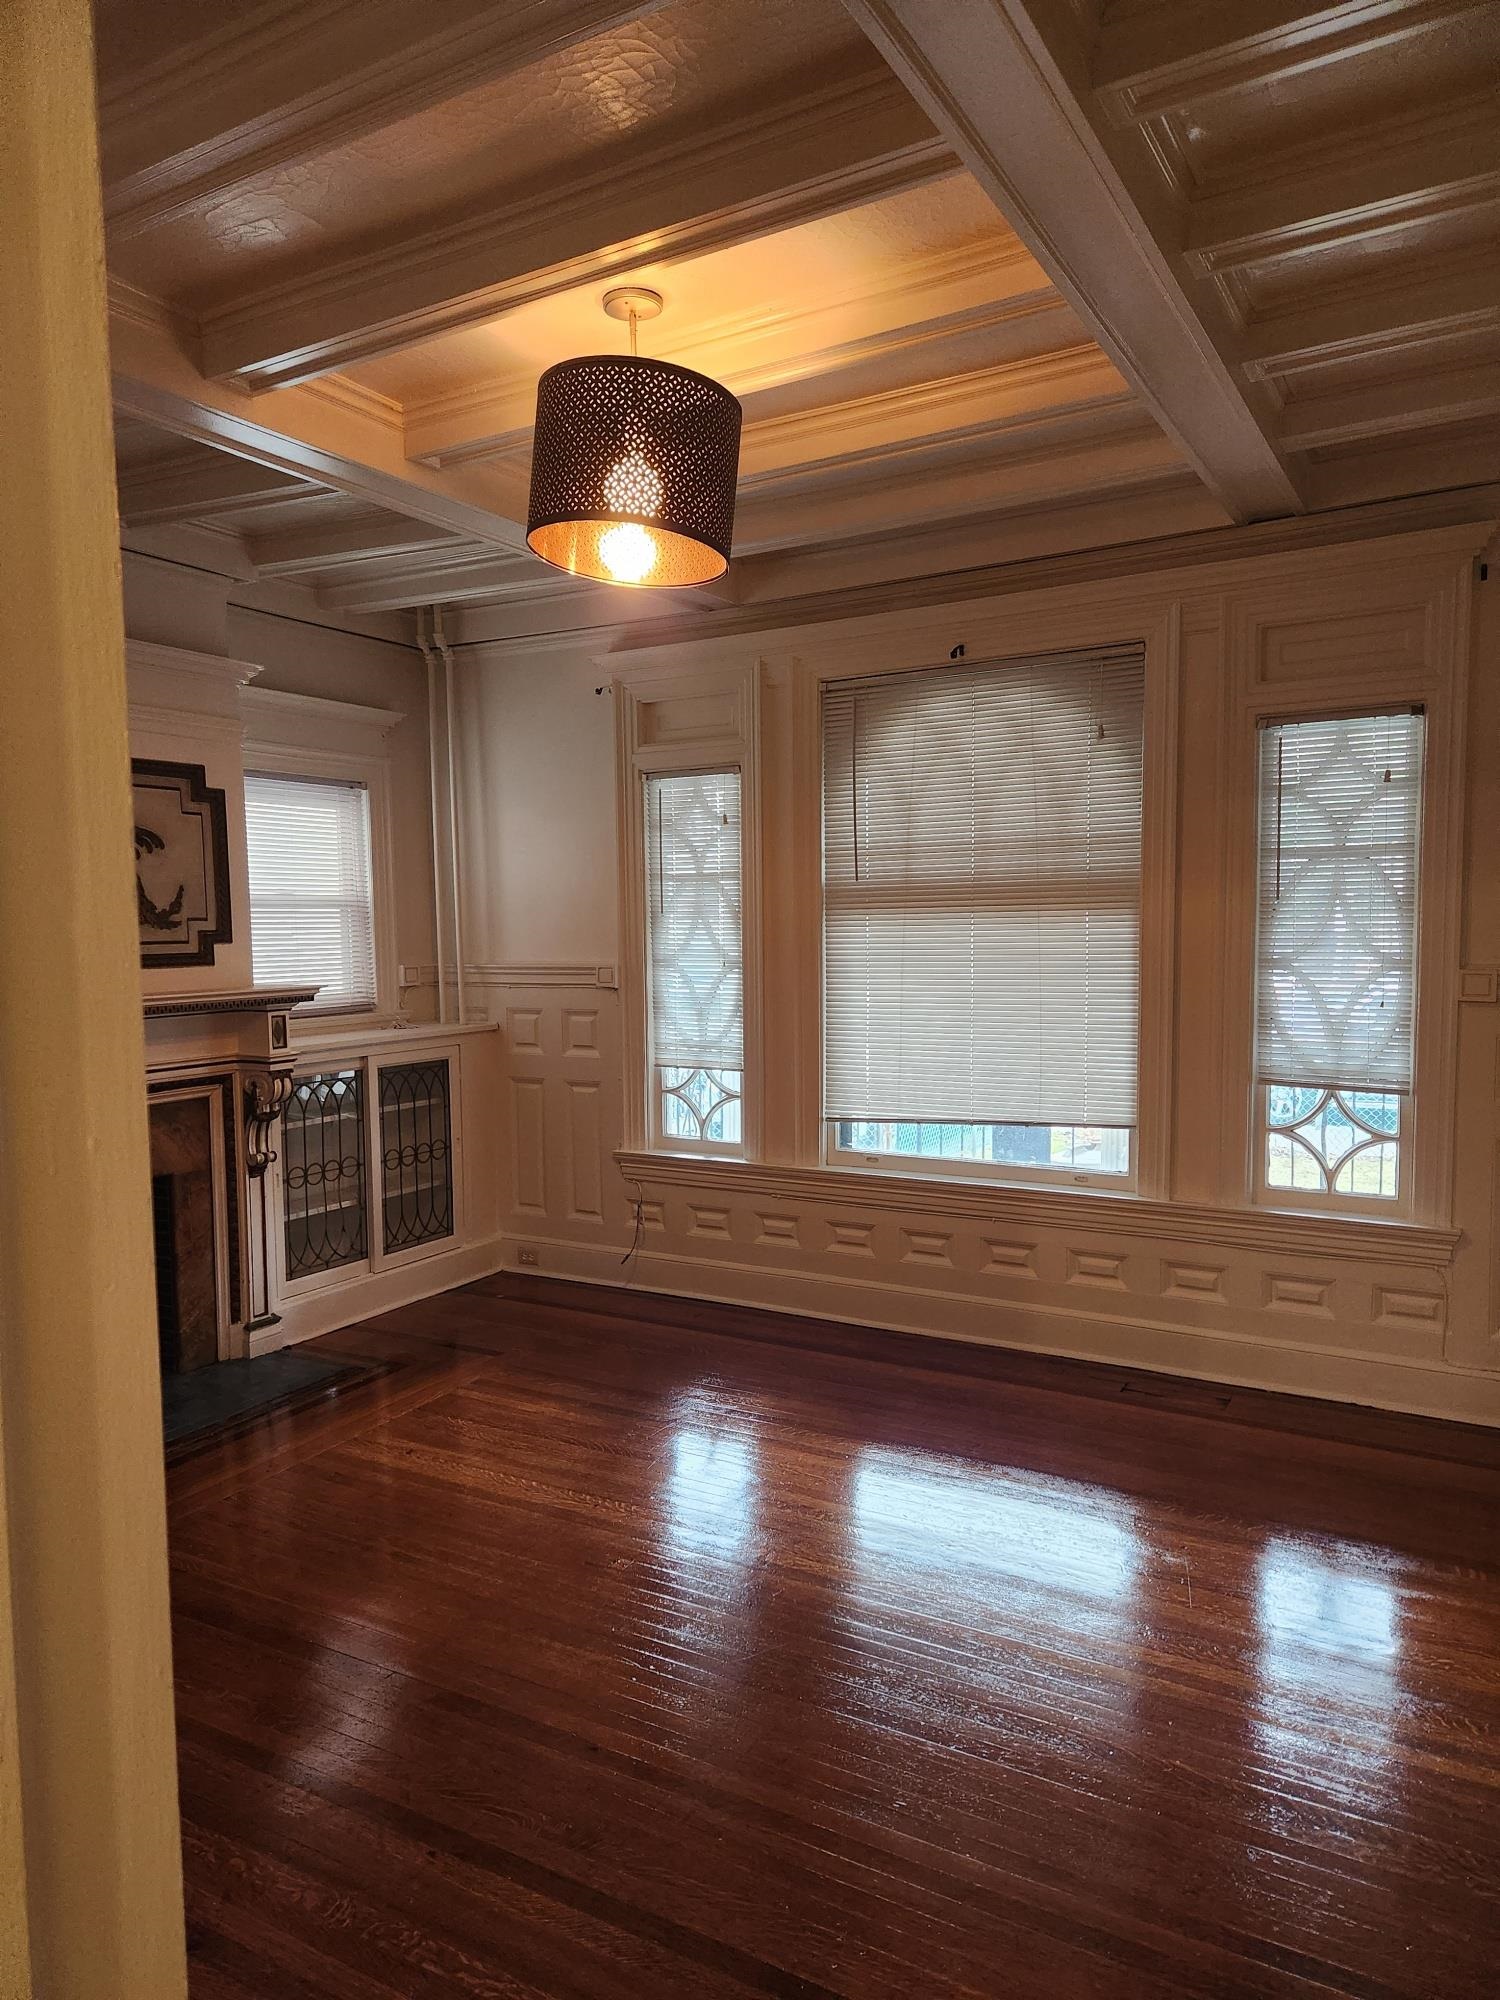 # 240004014 - For Rent in JERSEY CITY - Journal Square NJ